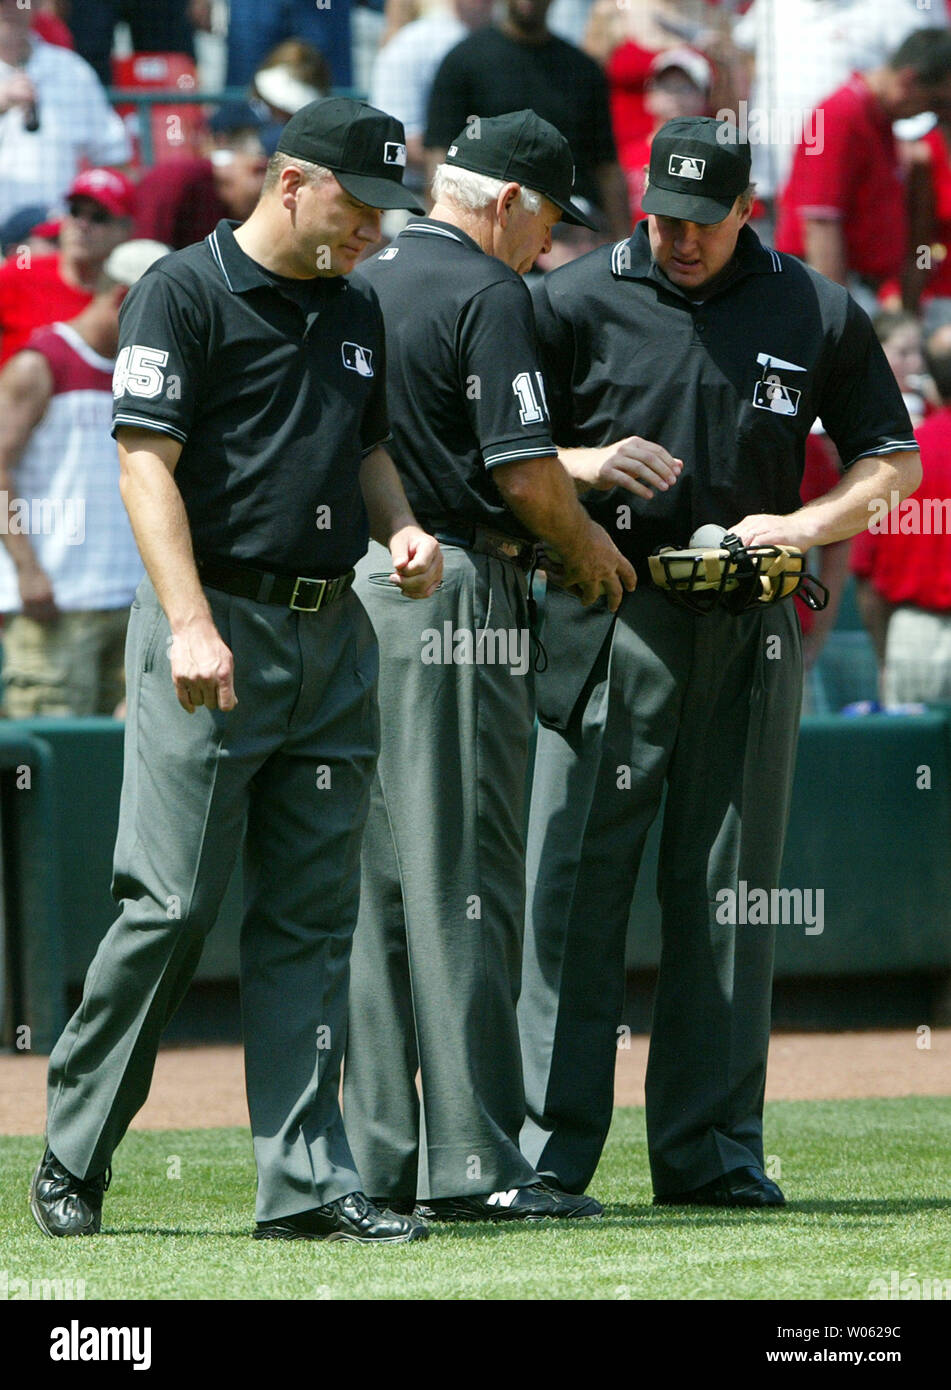 Homeplate umpire Bill Miller (R) takes the baseballs from crew chief Joe Brinkman (C) as first base umpire Jeff Nelson looks on during a game between the St. Louis Cardinals and the New York Yankees at Busch Stadium in St. Louis on June 12, 2005. Miller replaced Derryl Cousins who left the game with heart problems.  (UPI Photo/Bill Greenblatt) Stock Photo